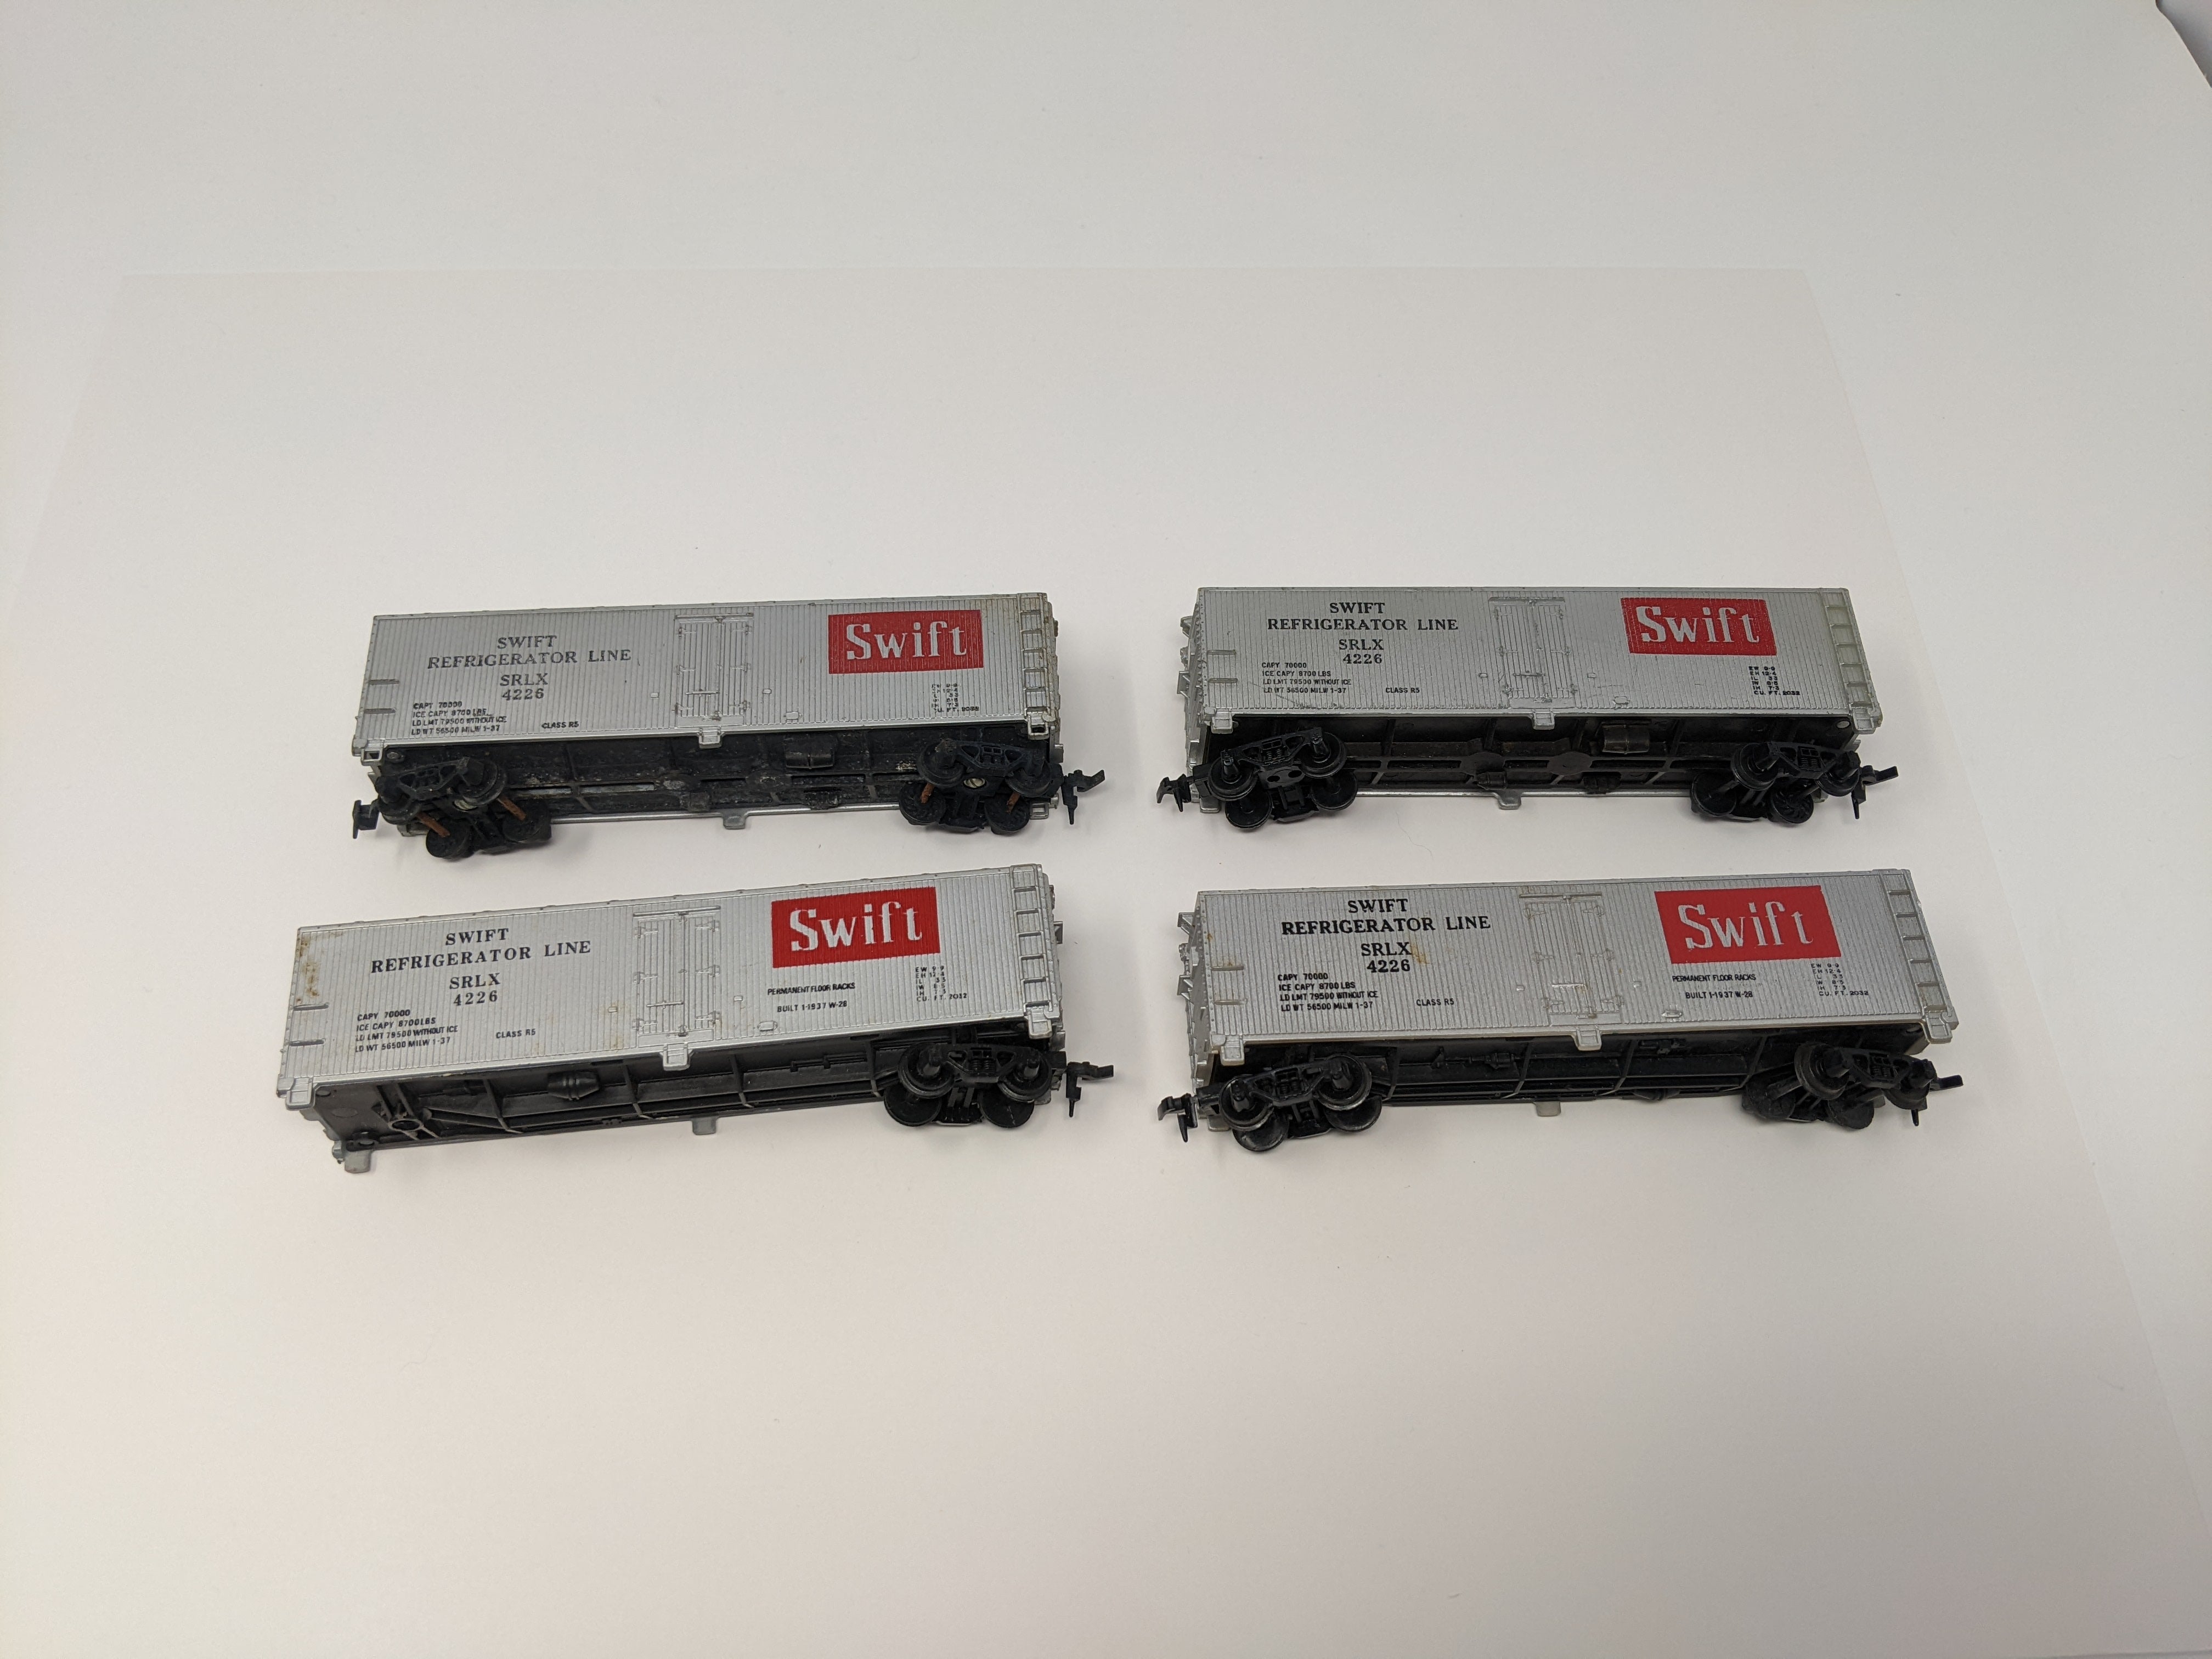 USED HO Scale, Lot of 4 Wooden Box Cars (various brands), Swift Refrigerator Line SRLX #4226, Read Description